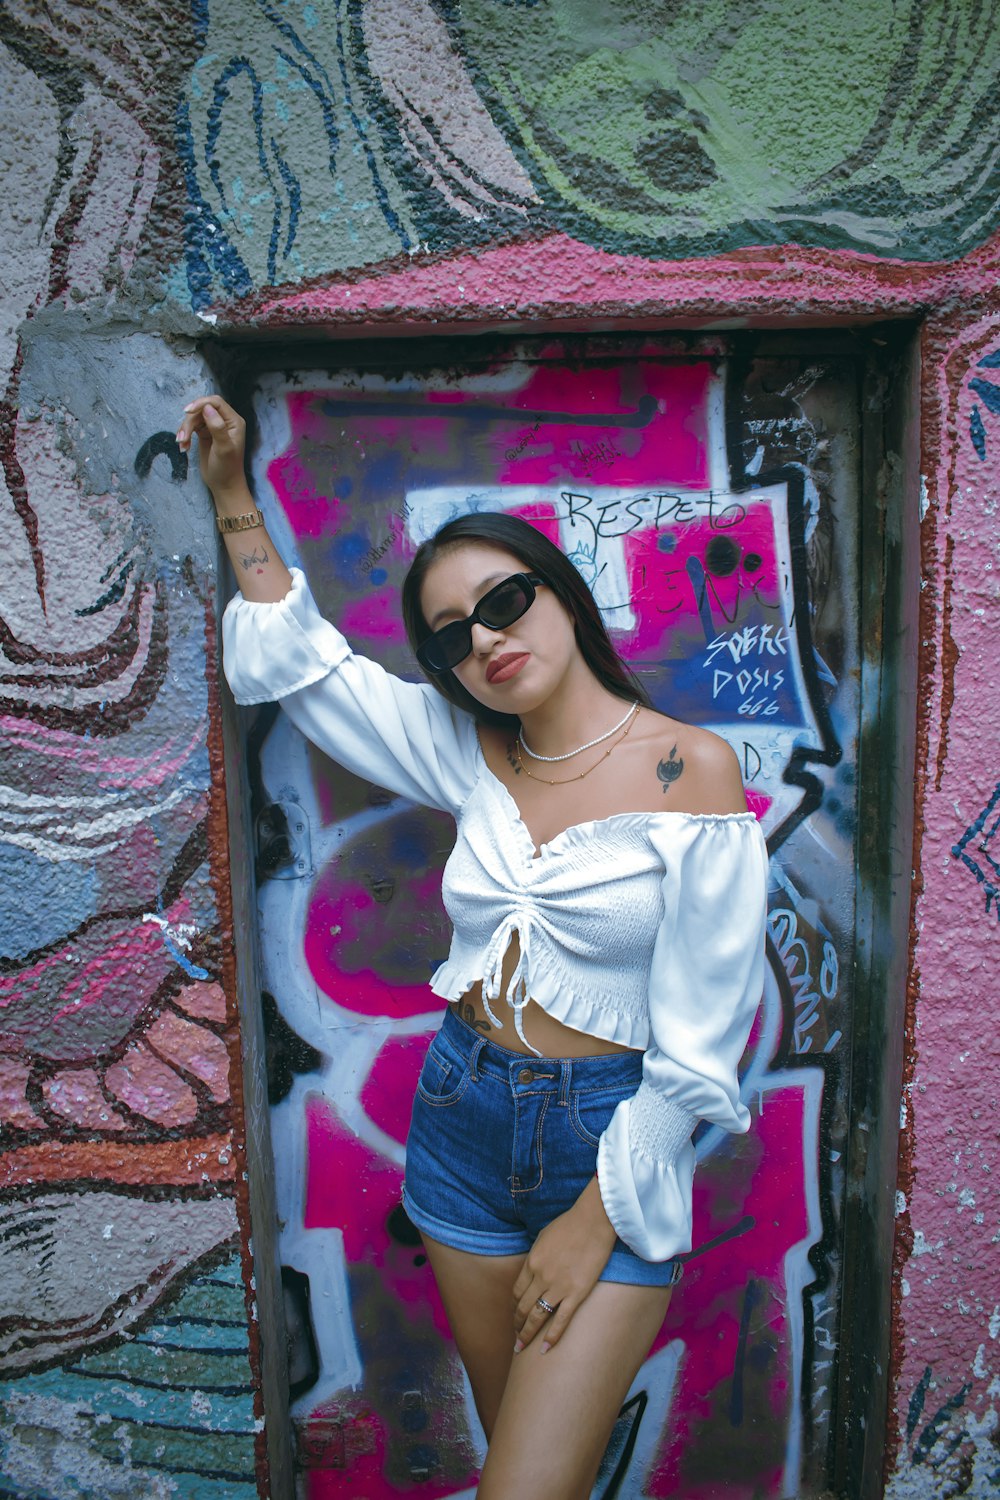 a woman in a white top and denim shorts posing in front of a graffiti wall